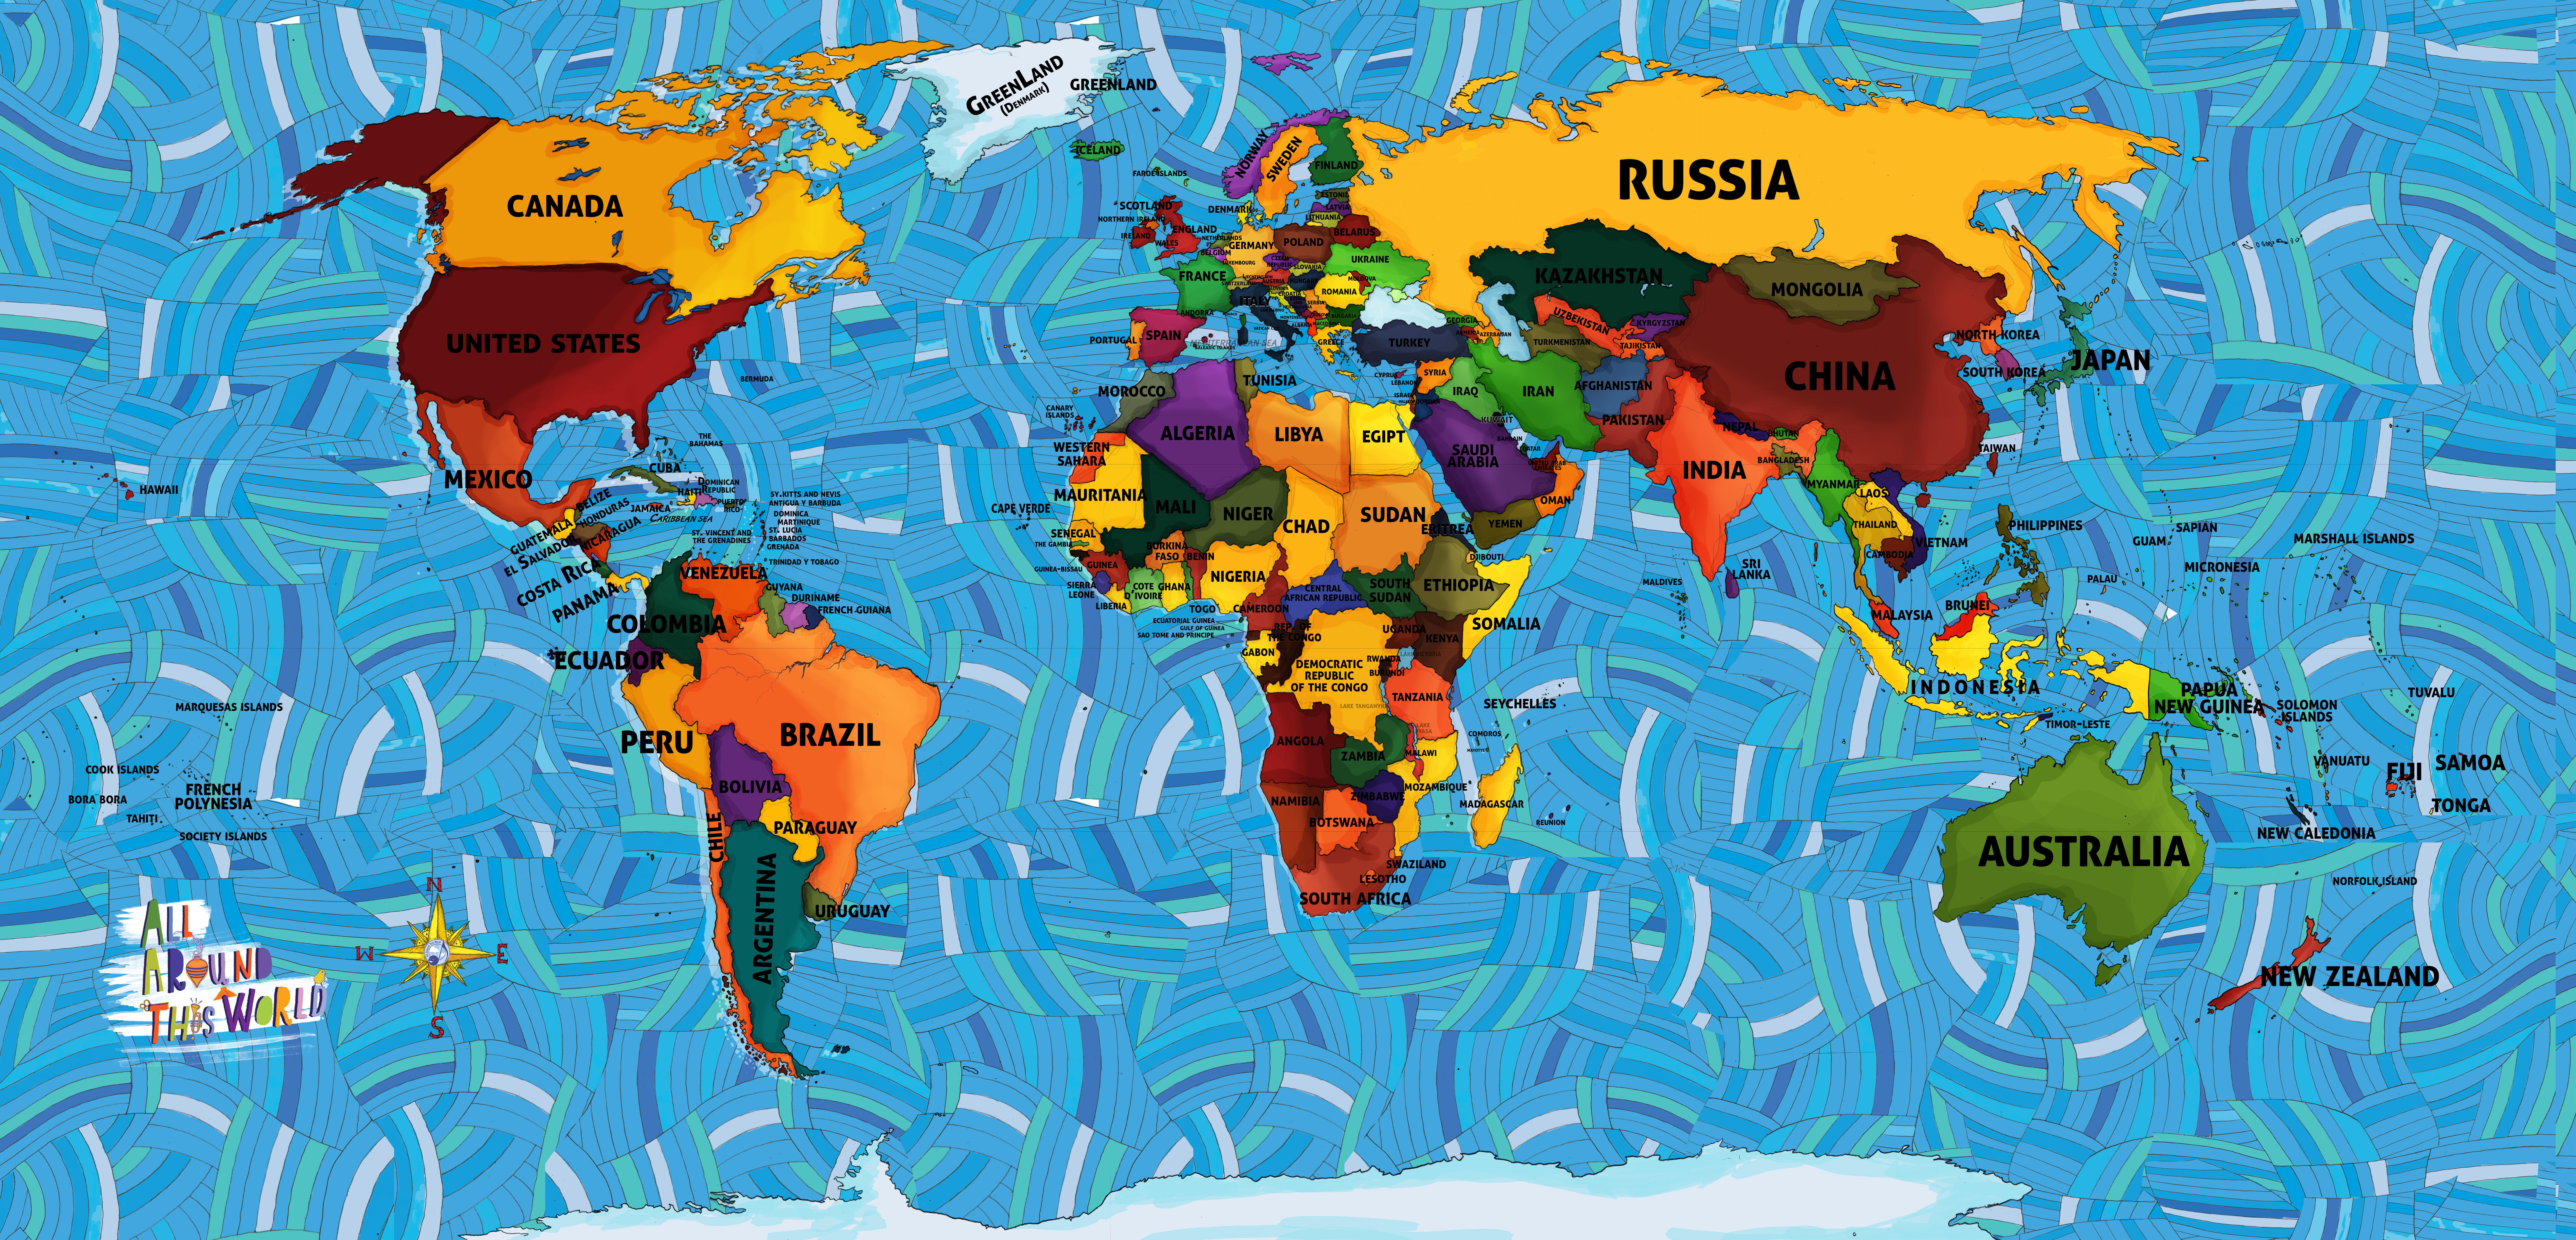 All Around This World Global "Everywhere Map" -- Global rhythms for kids